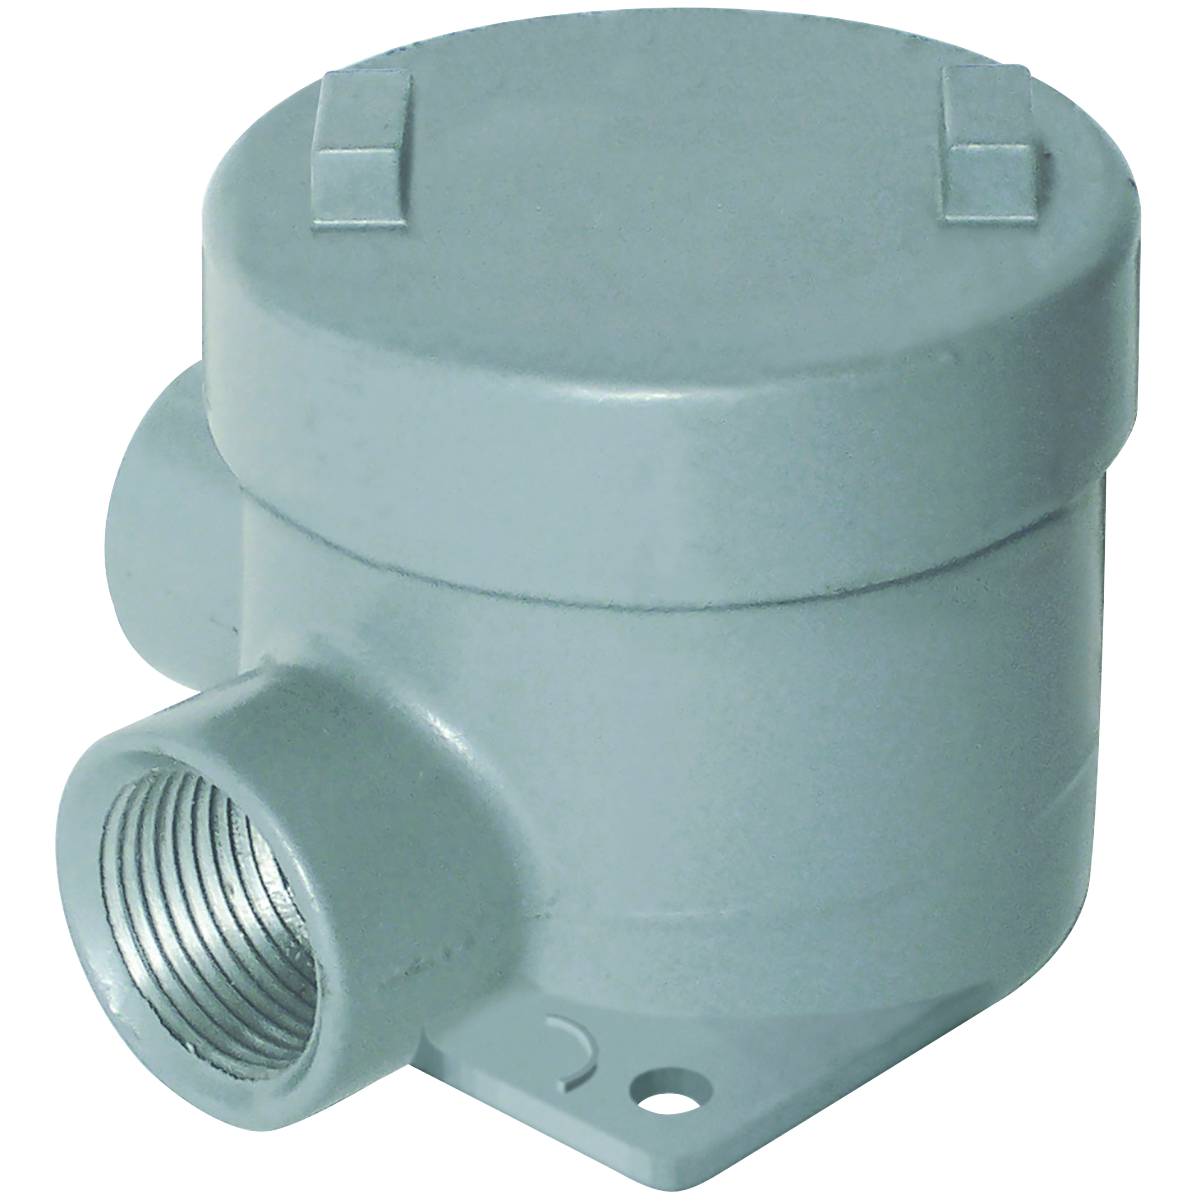 GEB SERIES - ALUMINUM OUTLET BODY - L TYPE - HUB SIZE 1-1/4 INCH -VOLUME 29.0 CUBIC INCHES